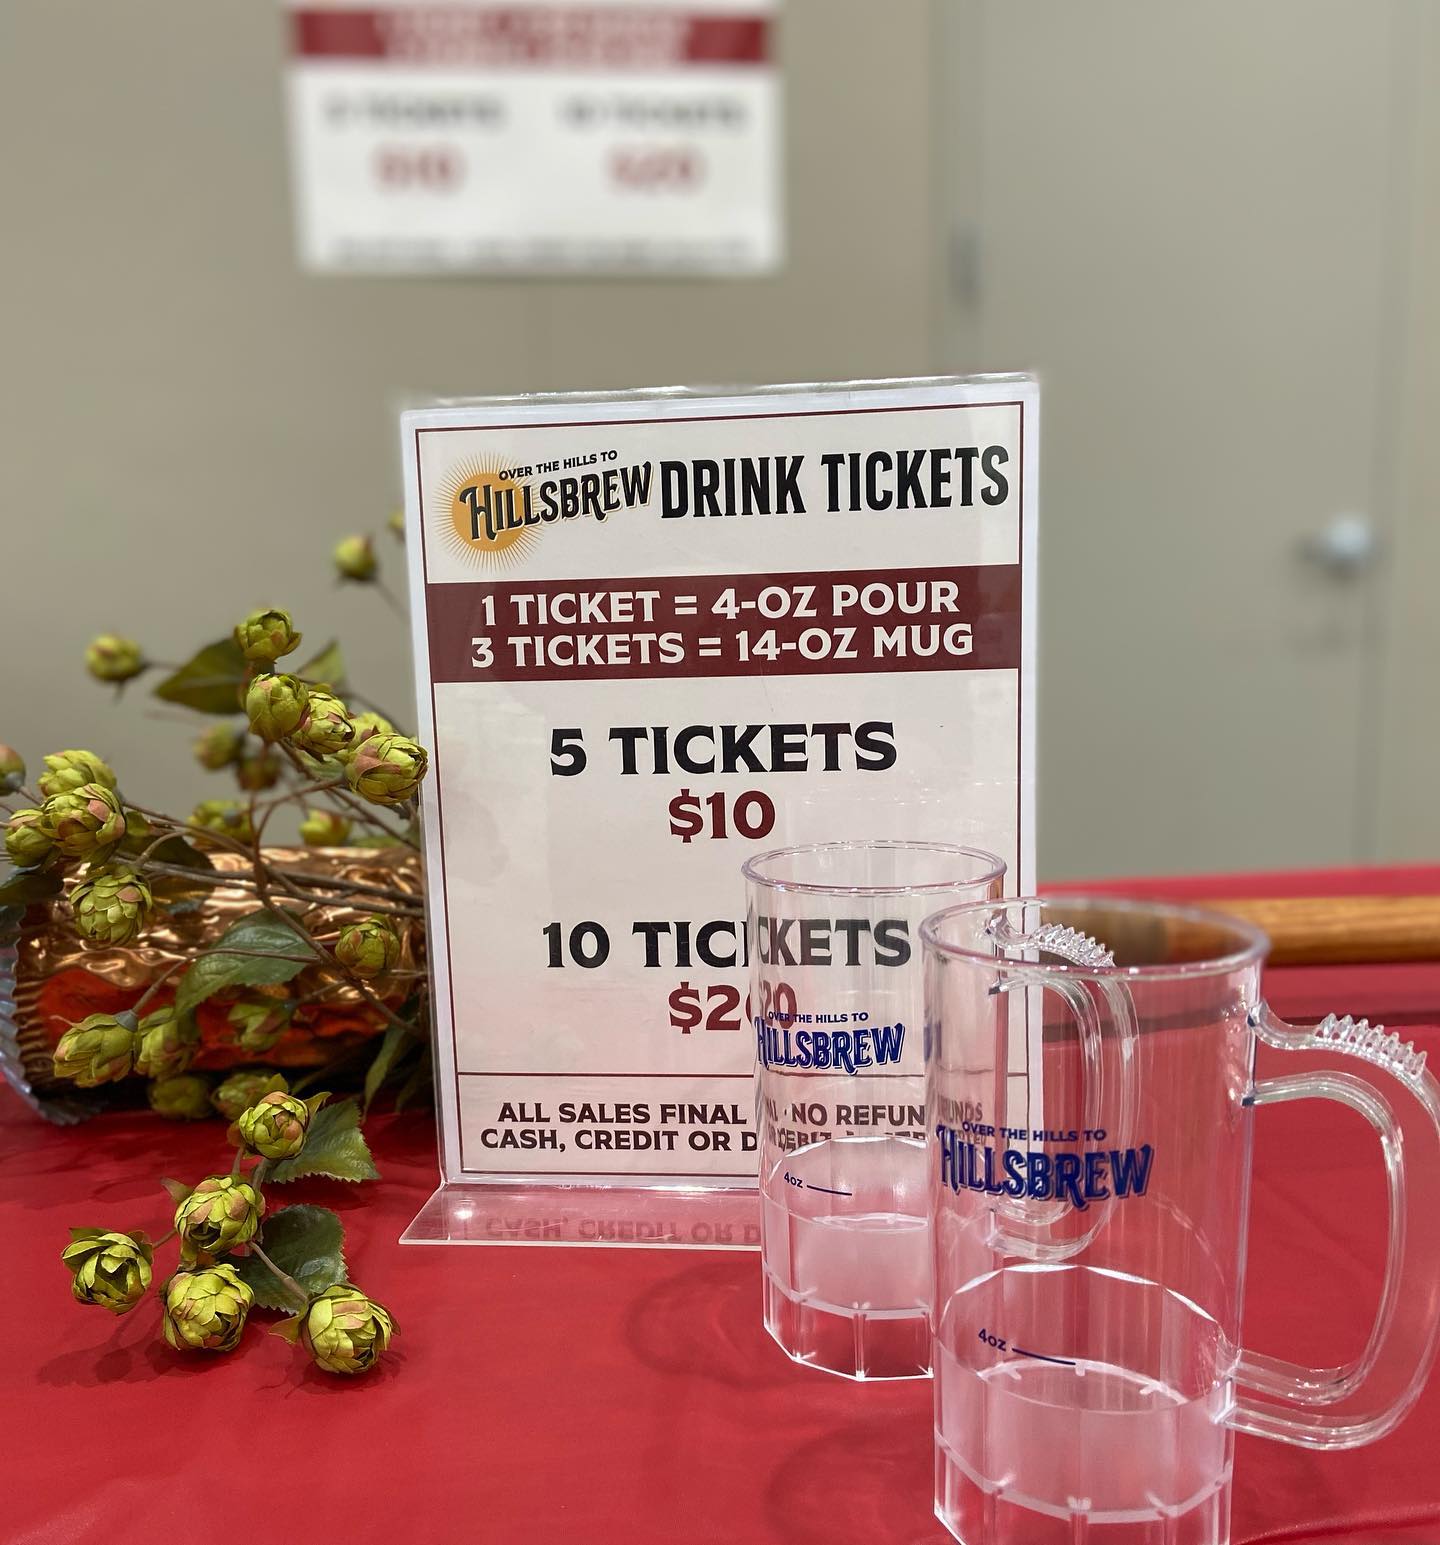 Additional drink tickets at the Hillsbrew Fest are $10 for 5 tickets or $20 for 10 tickets. (image courtesy of the Hillsbrew Fest)